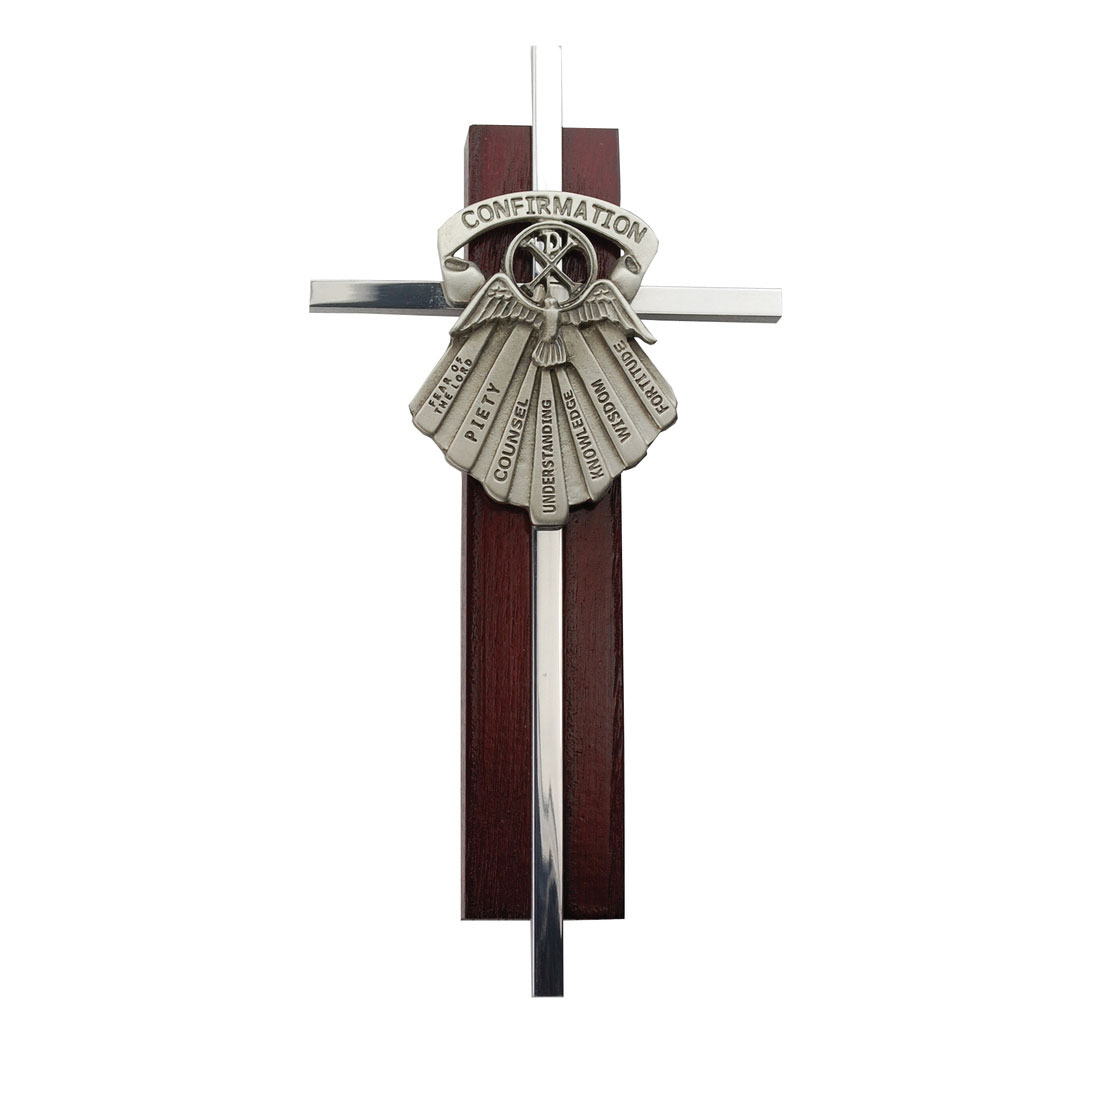 Silver Confirmation Cross on Cherry Wood